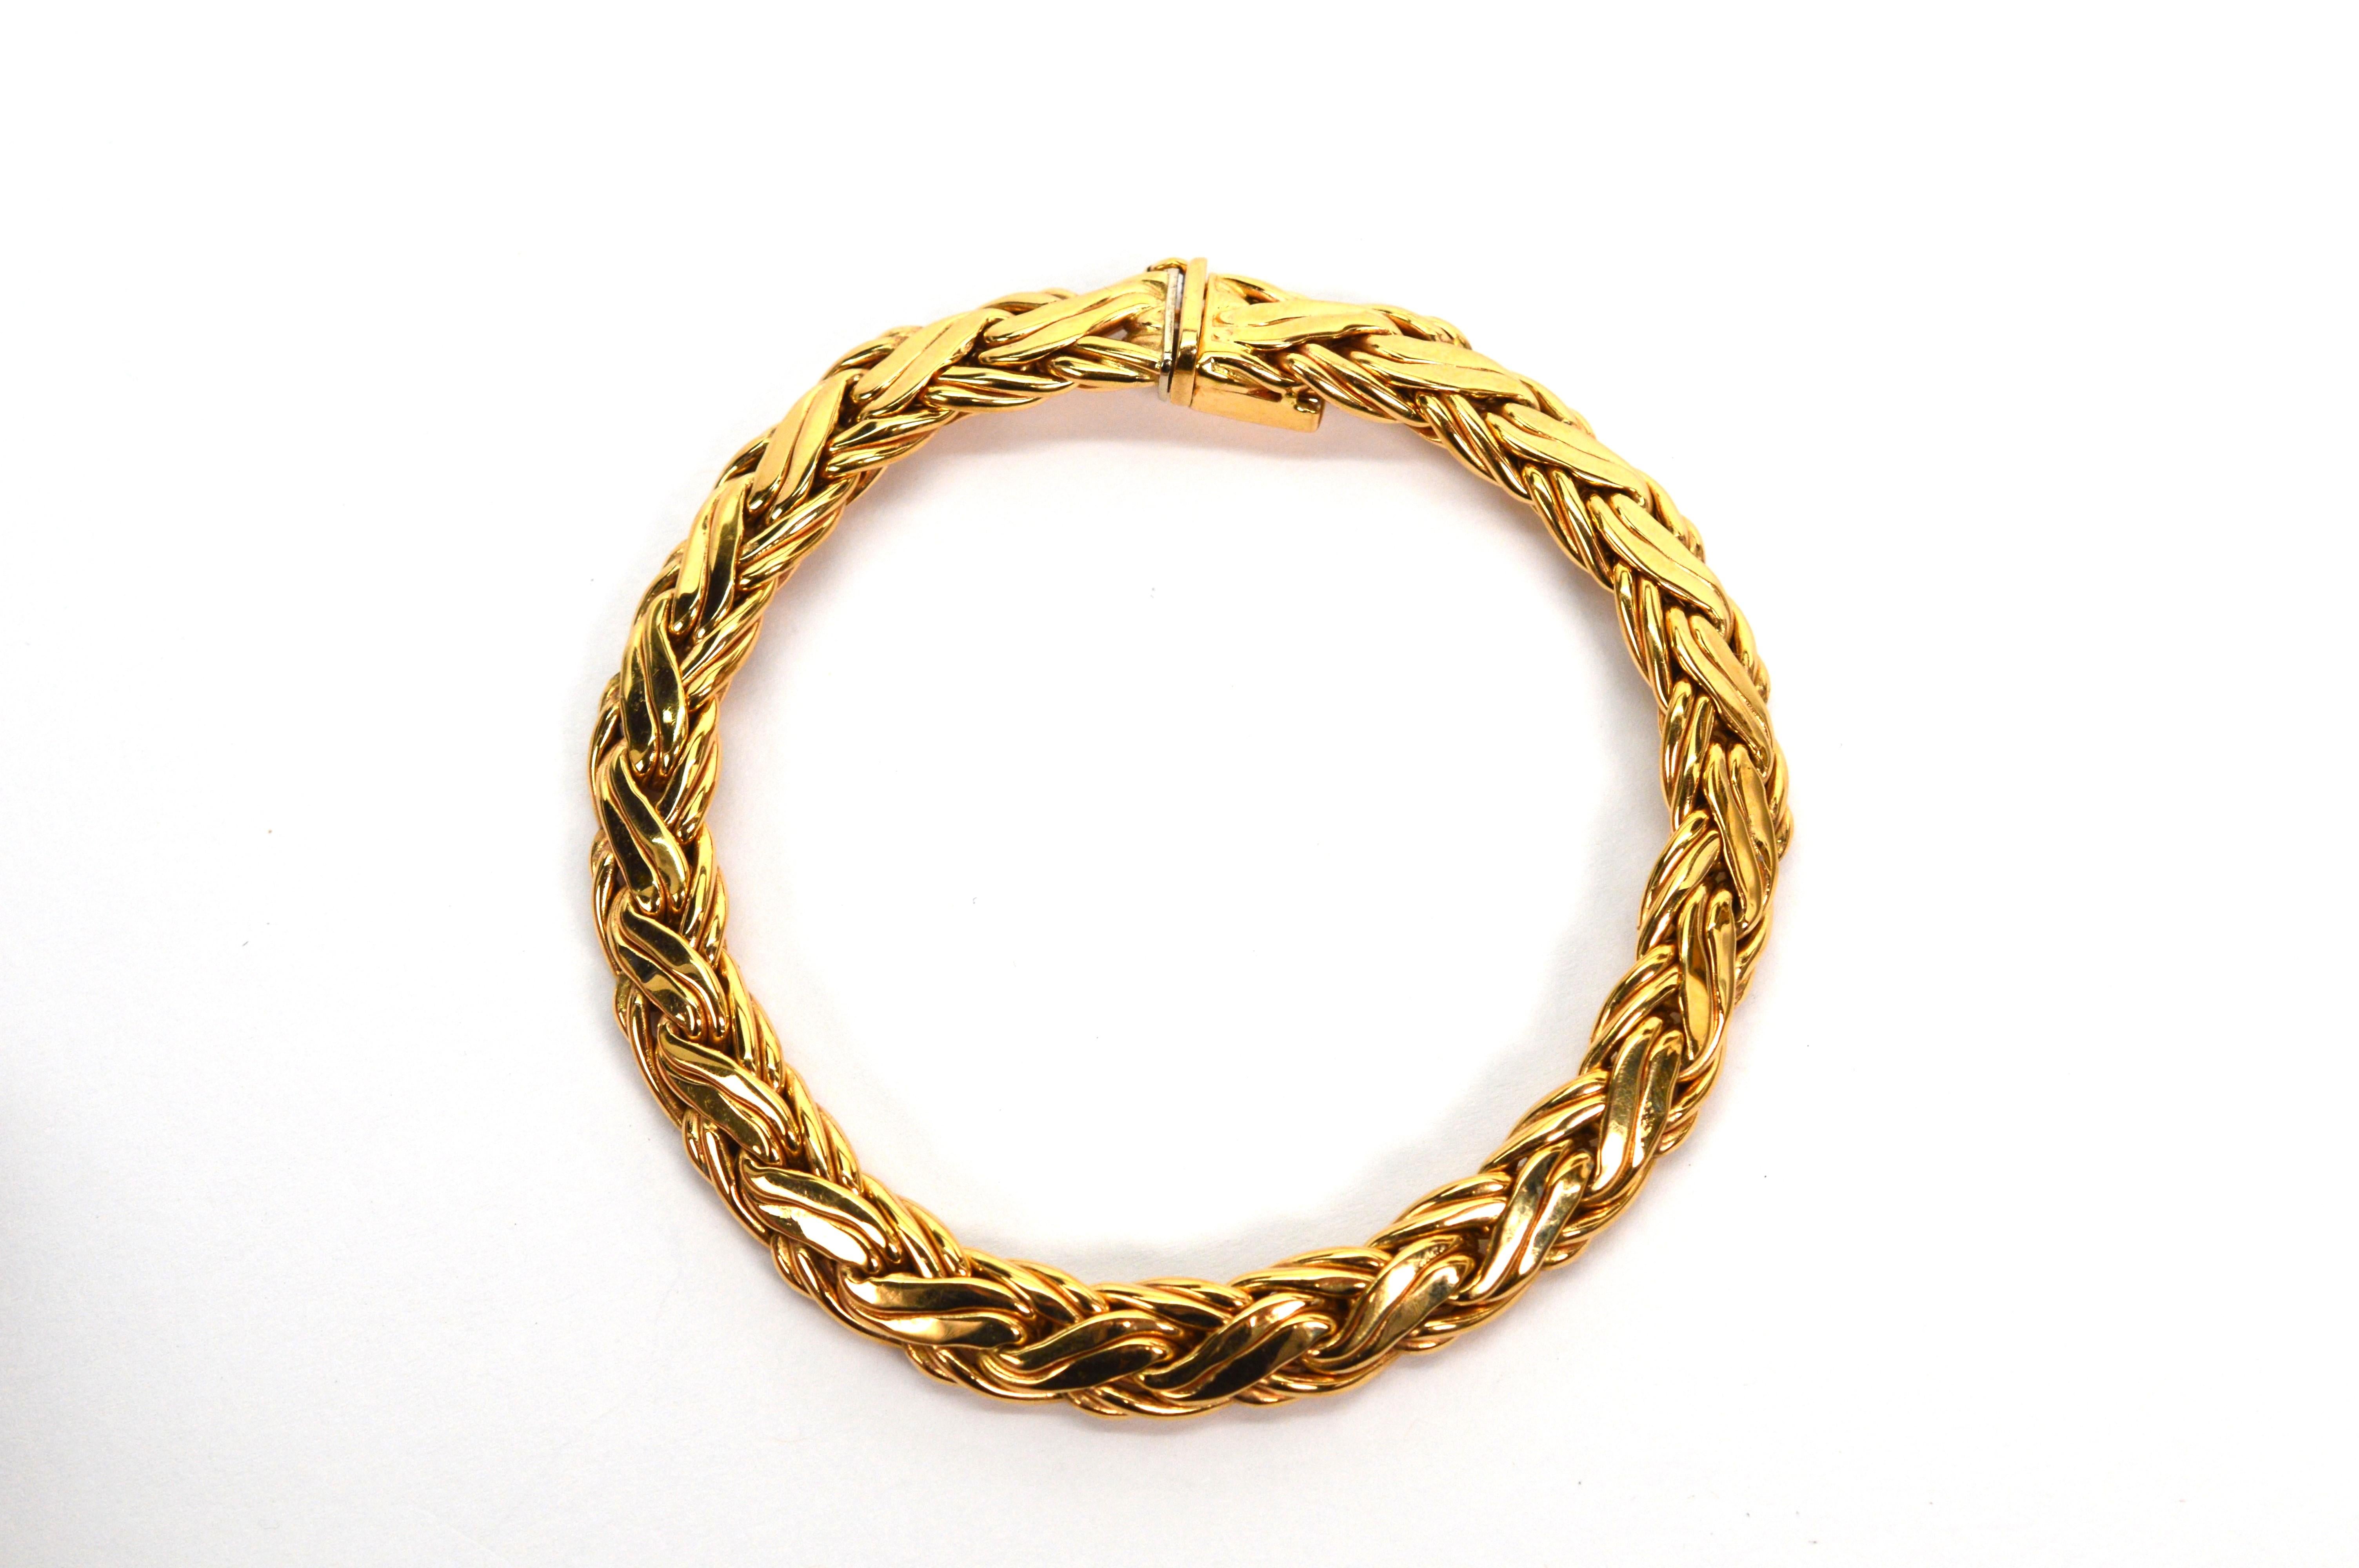 Zelman & Friedman 14 Karat Yellow Gold Wheat Chain Bracelet  In Excellent Condition For Sale In Mount Kisco, NY